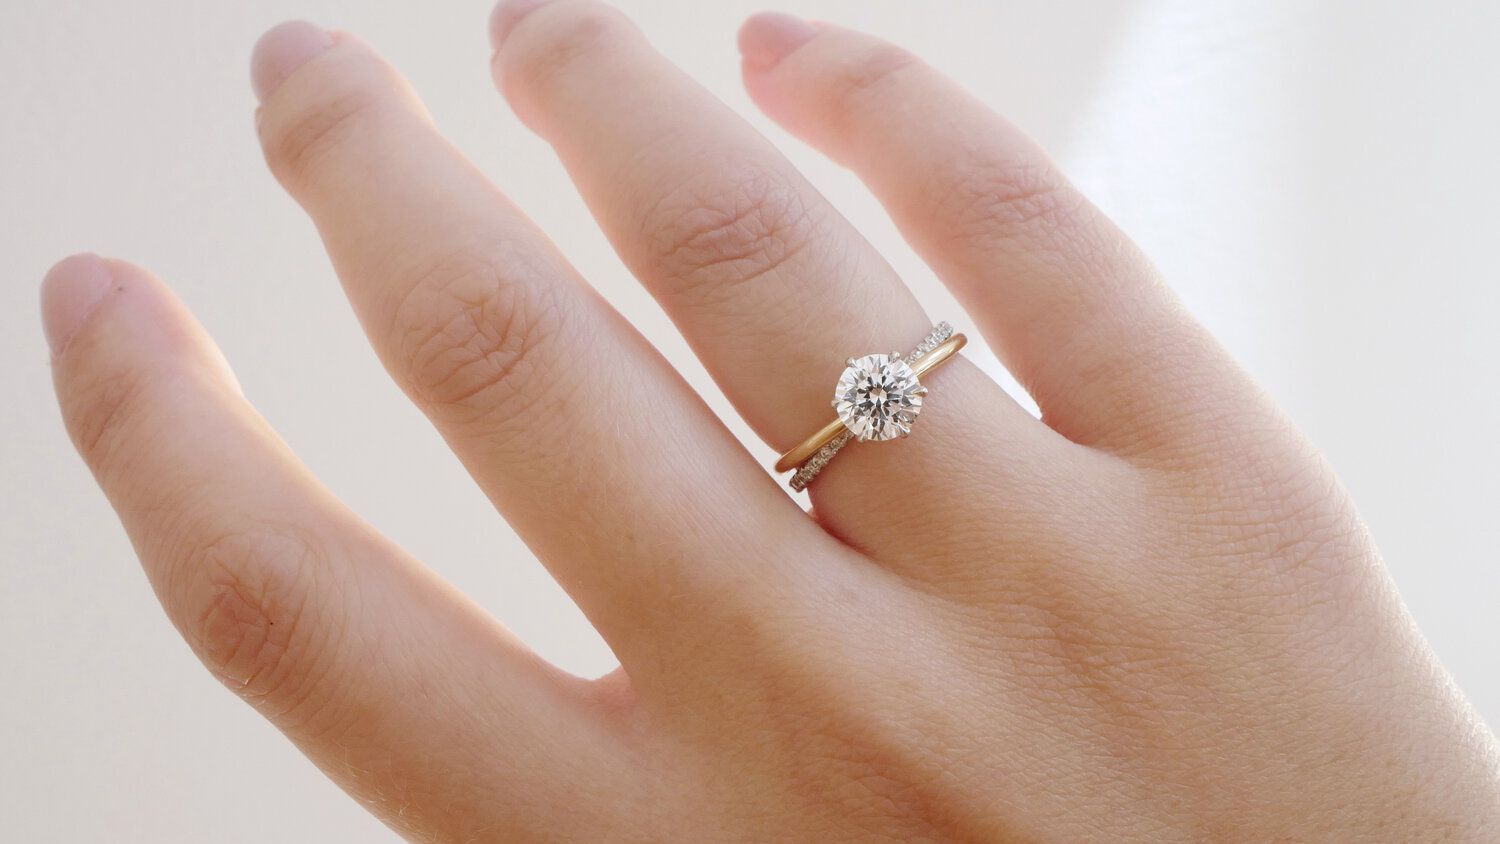 Custom made engagement rings are the current hot favourite